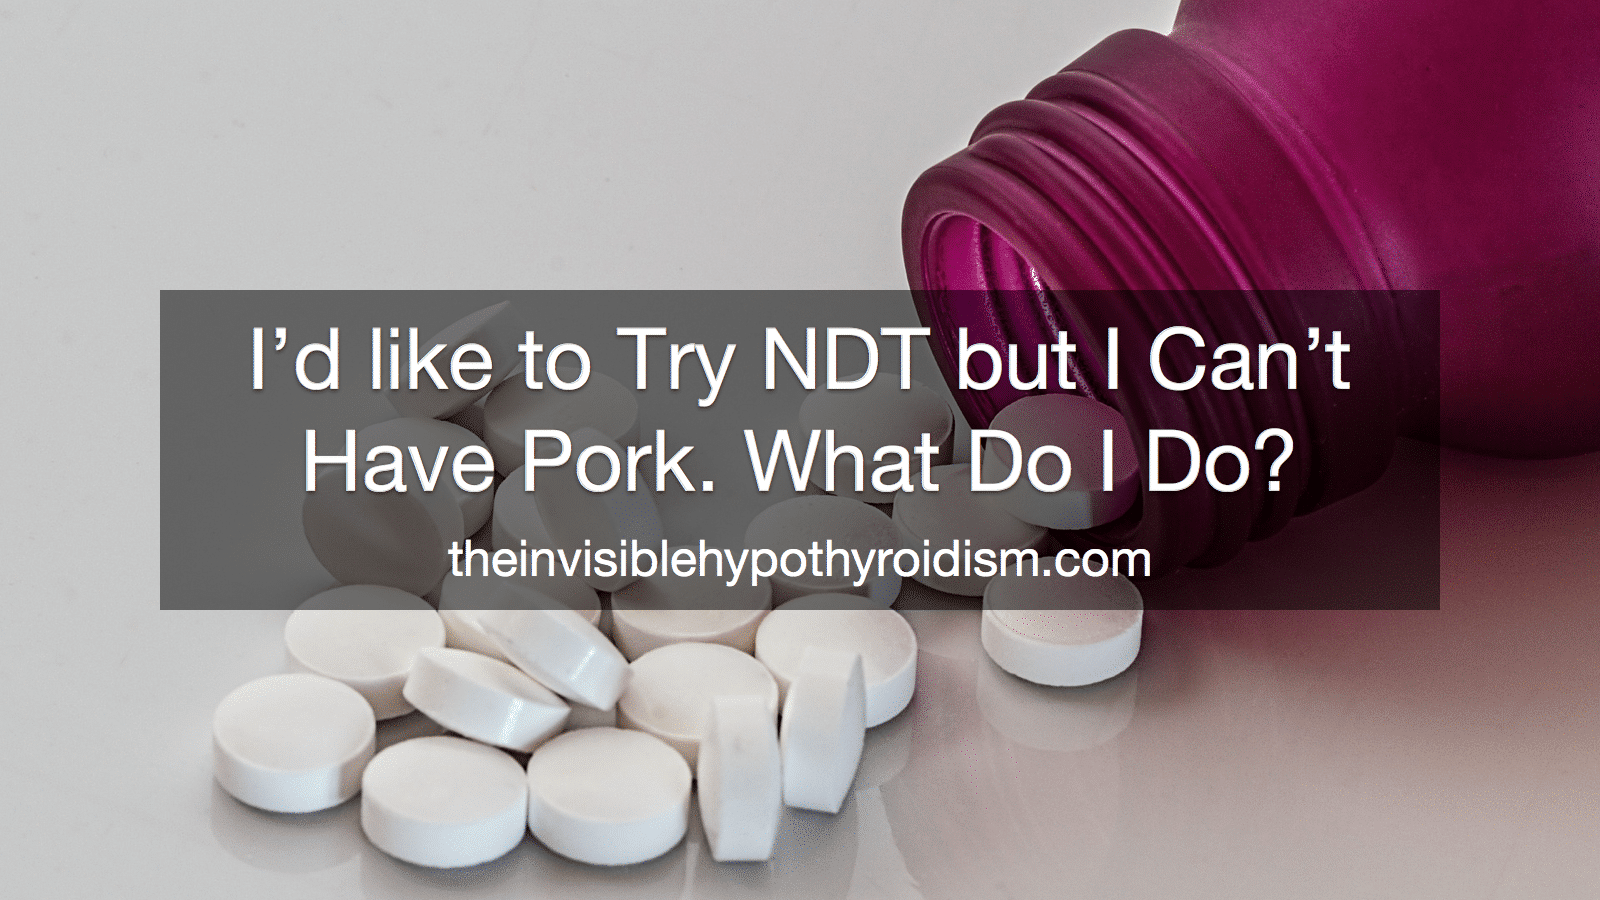 I'd like to Try NDT but I'm Vegetarian/Can't Have Pork. What Do I Do?